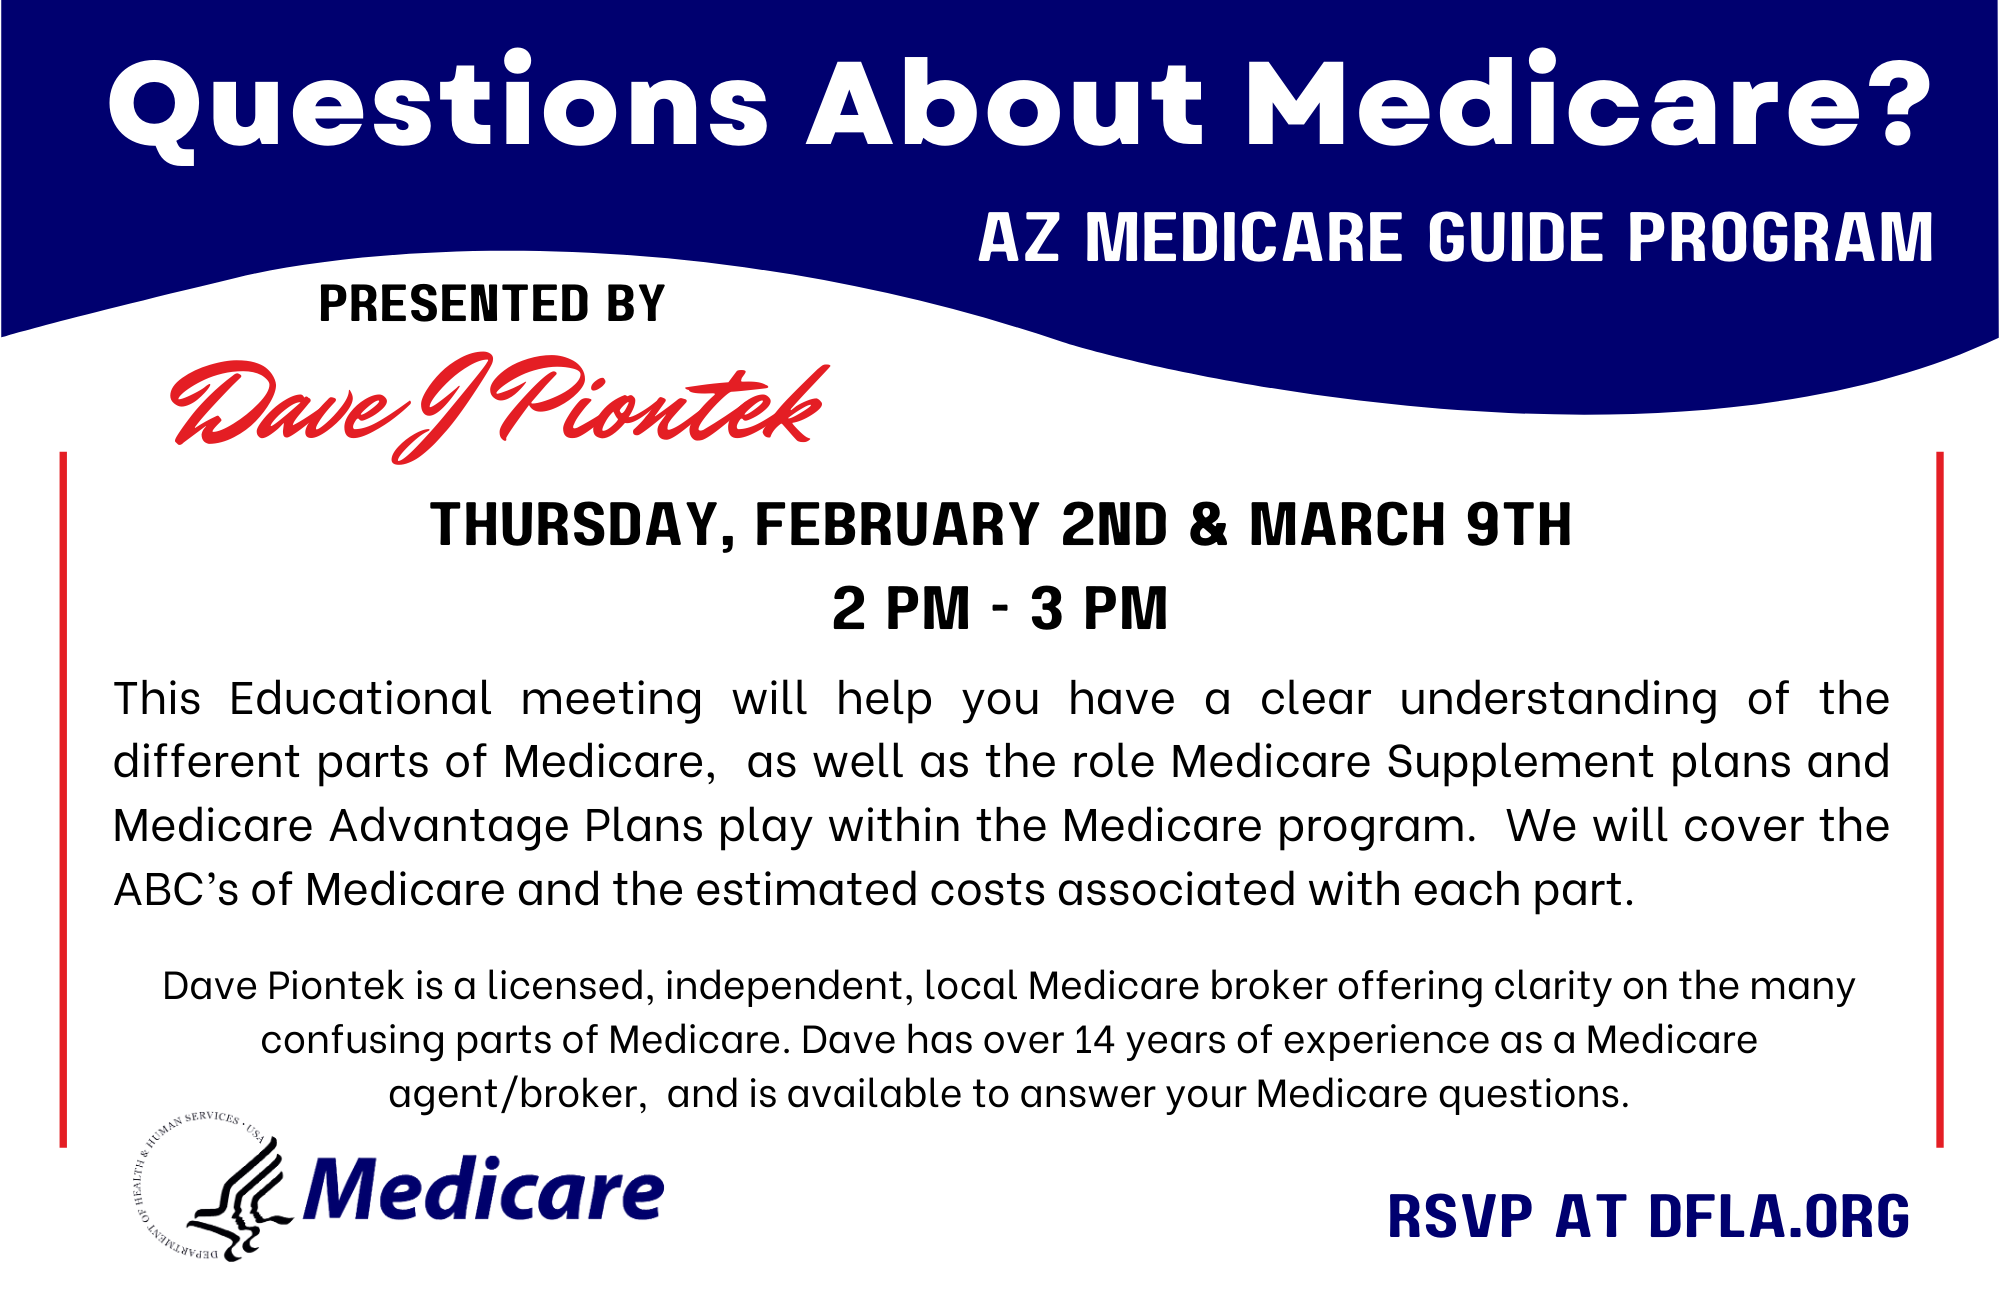 Questions about Medicare? Dave Piontek from AZ Medicare Guide is here to help!